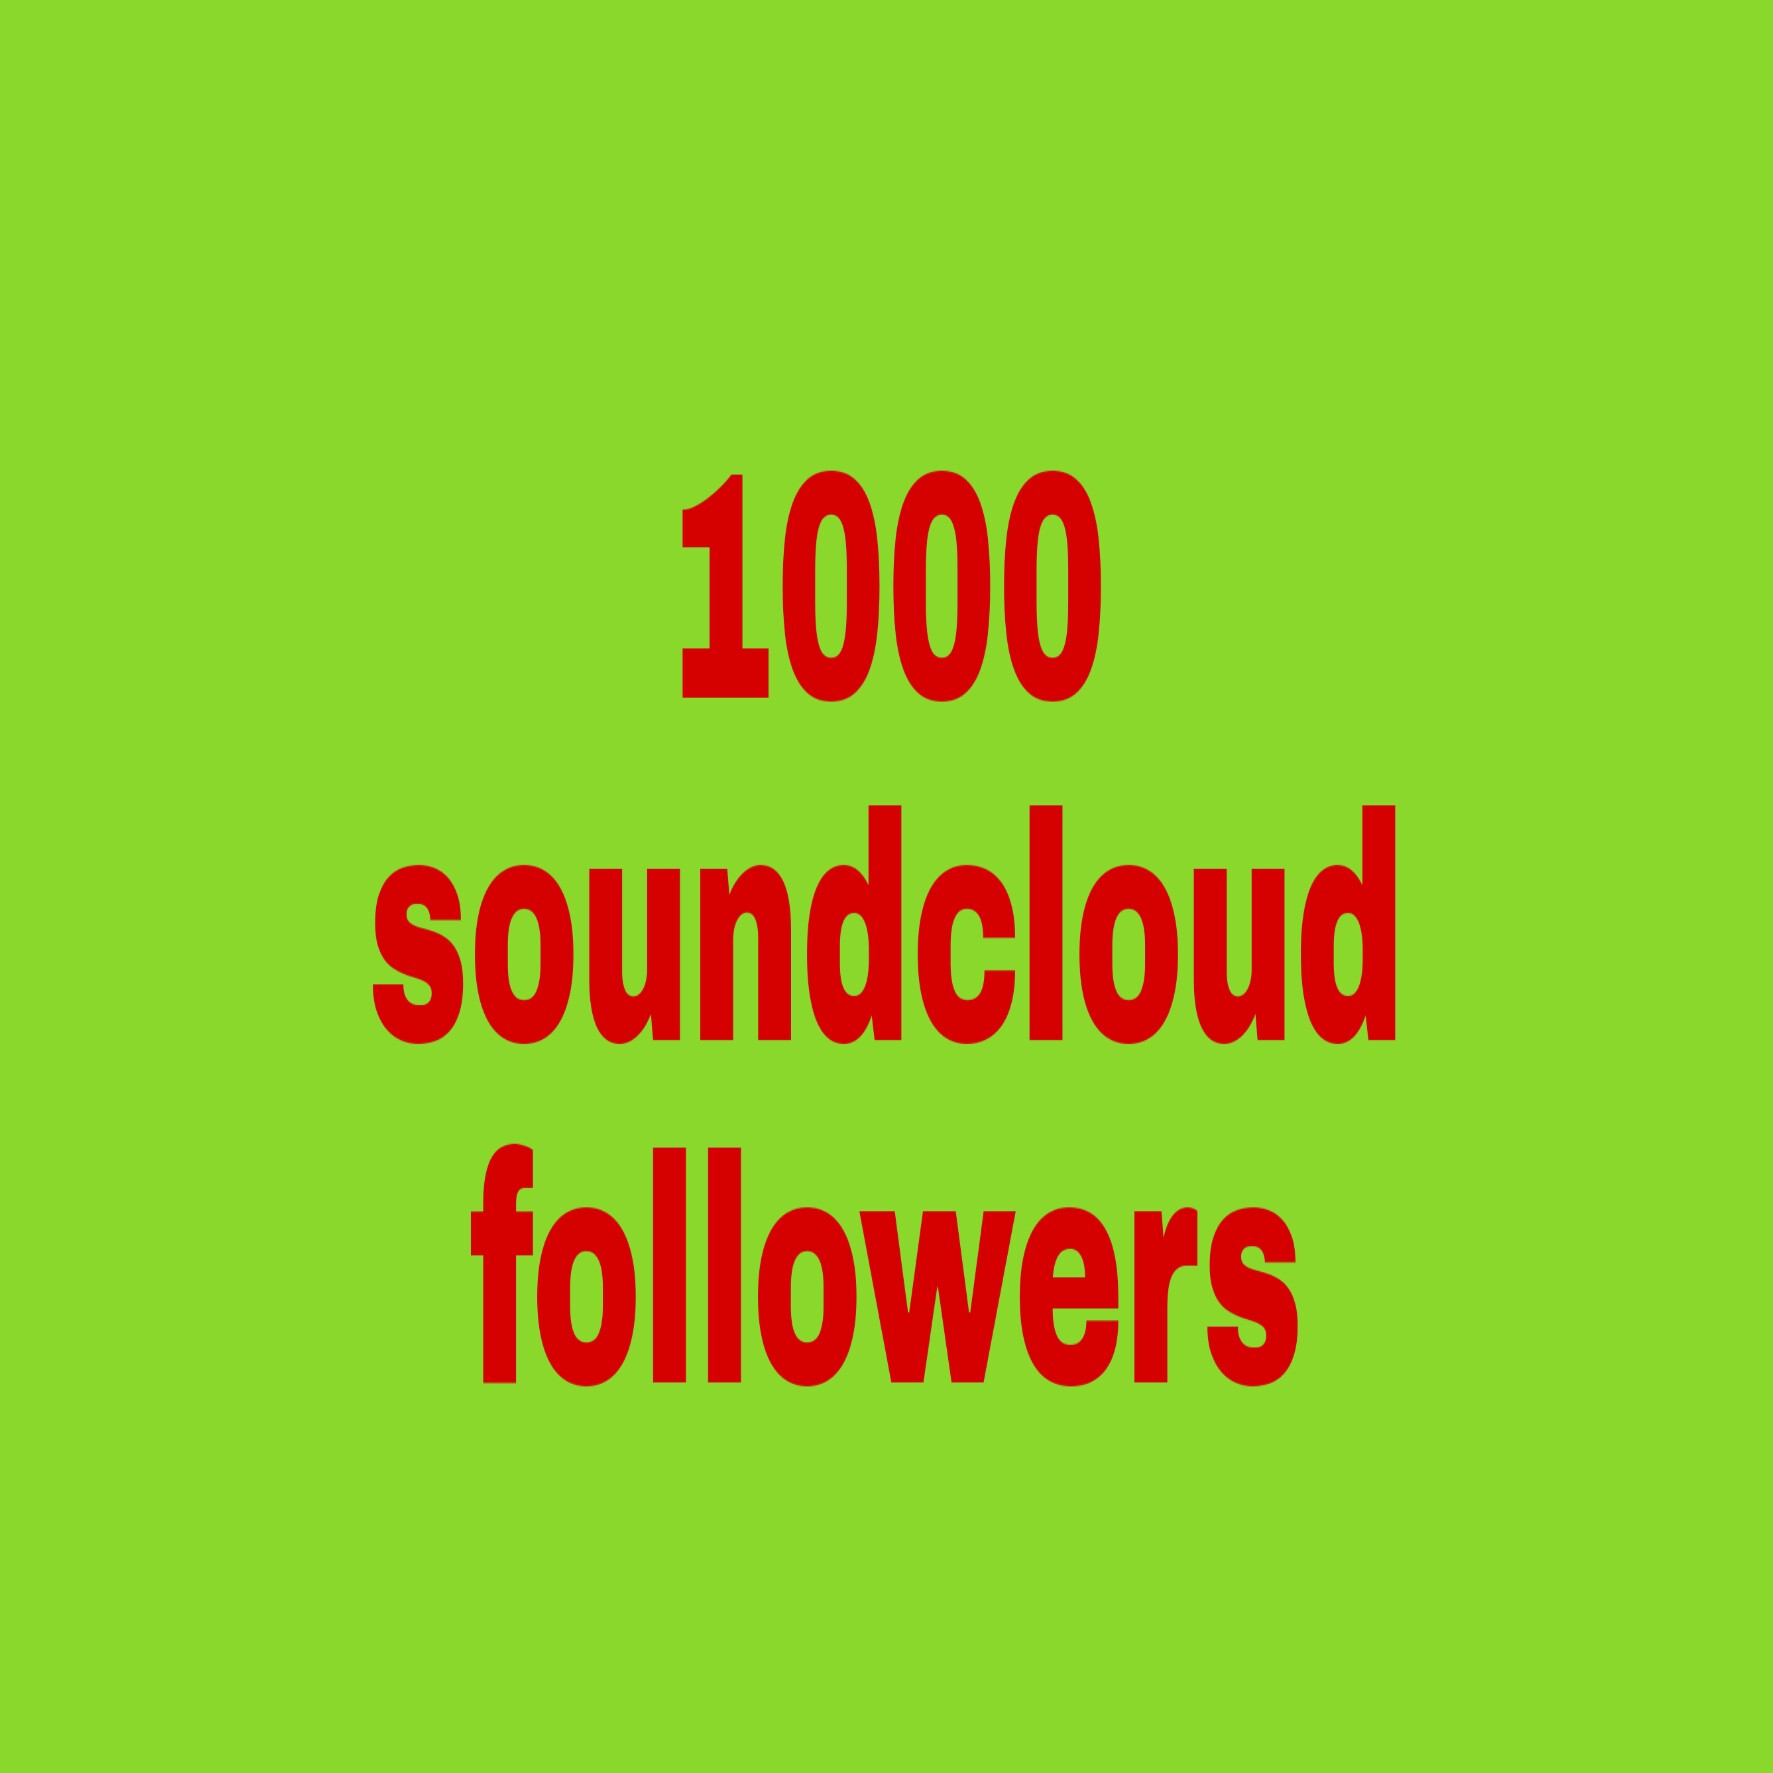 1000 soundcloud followers fast delivery